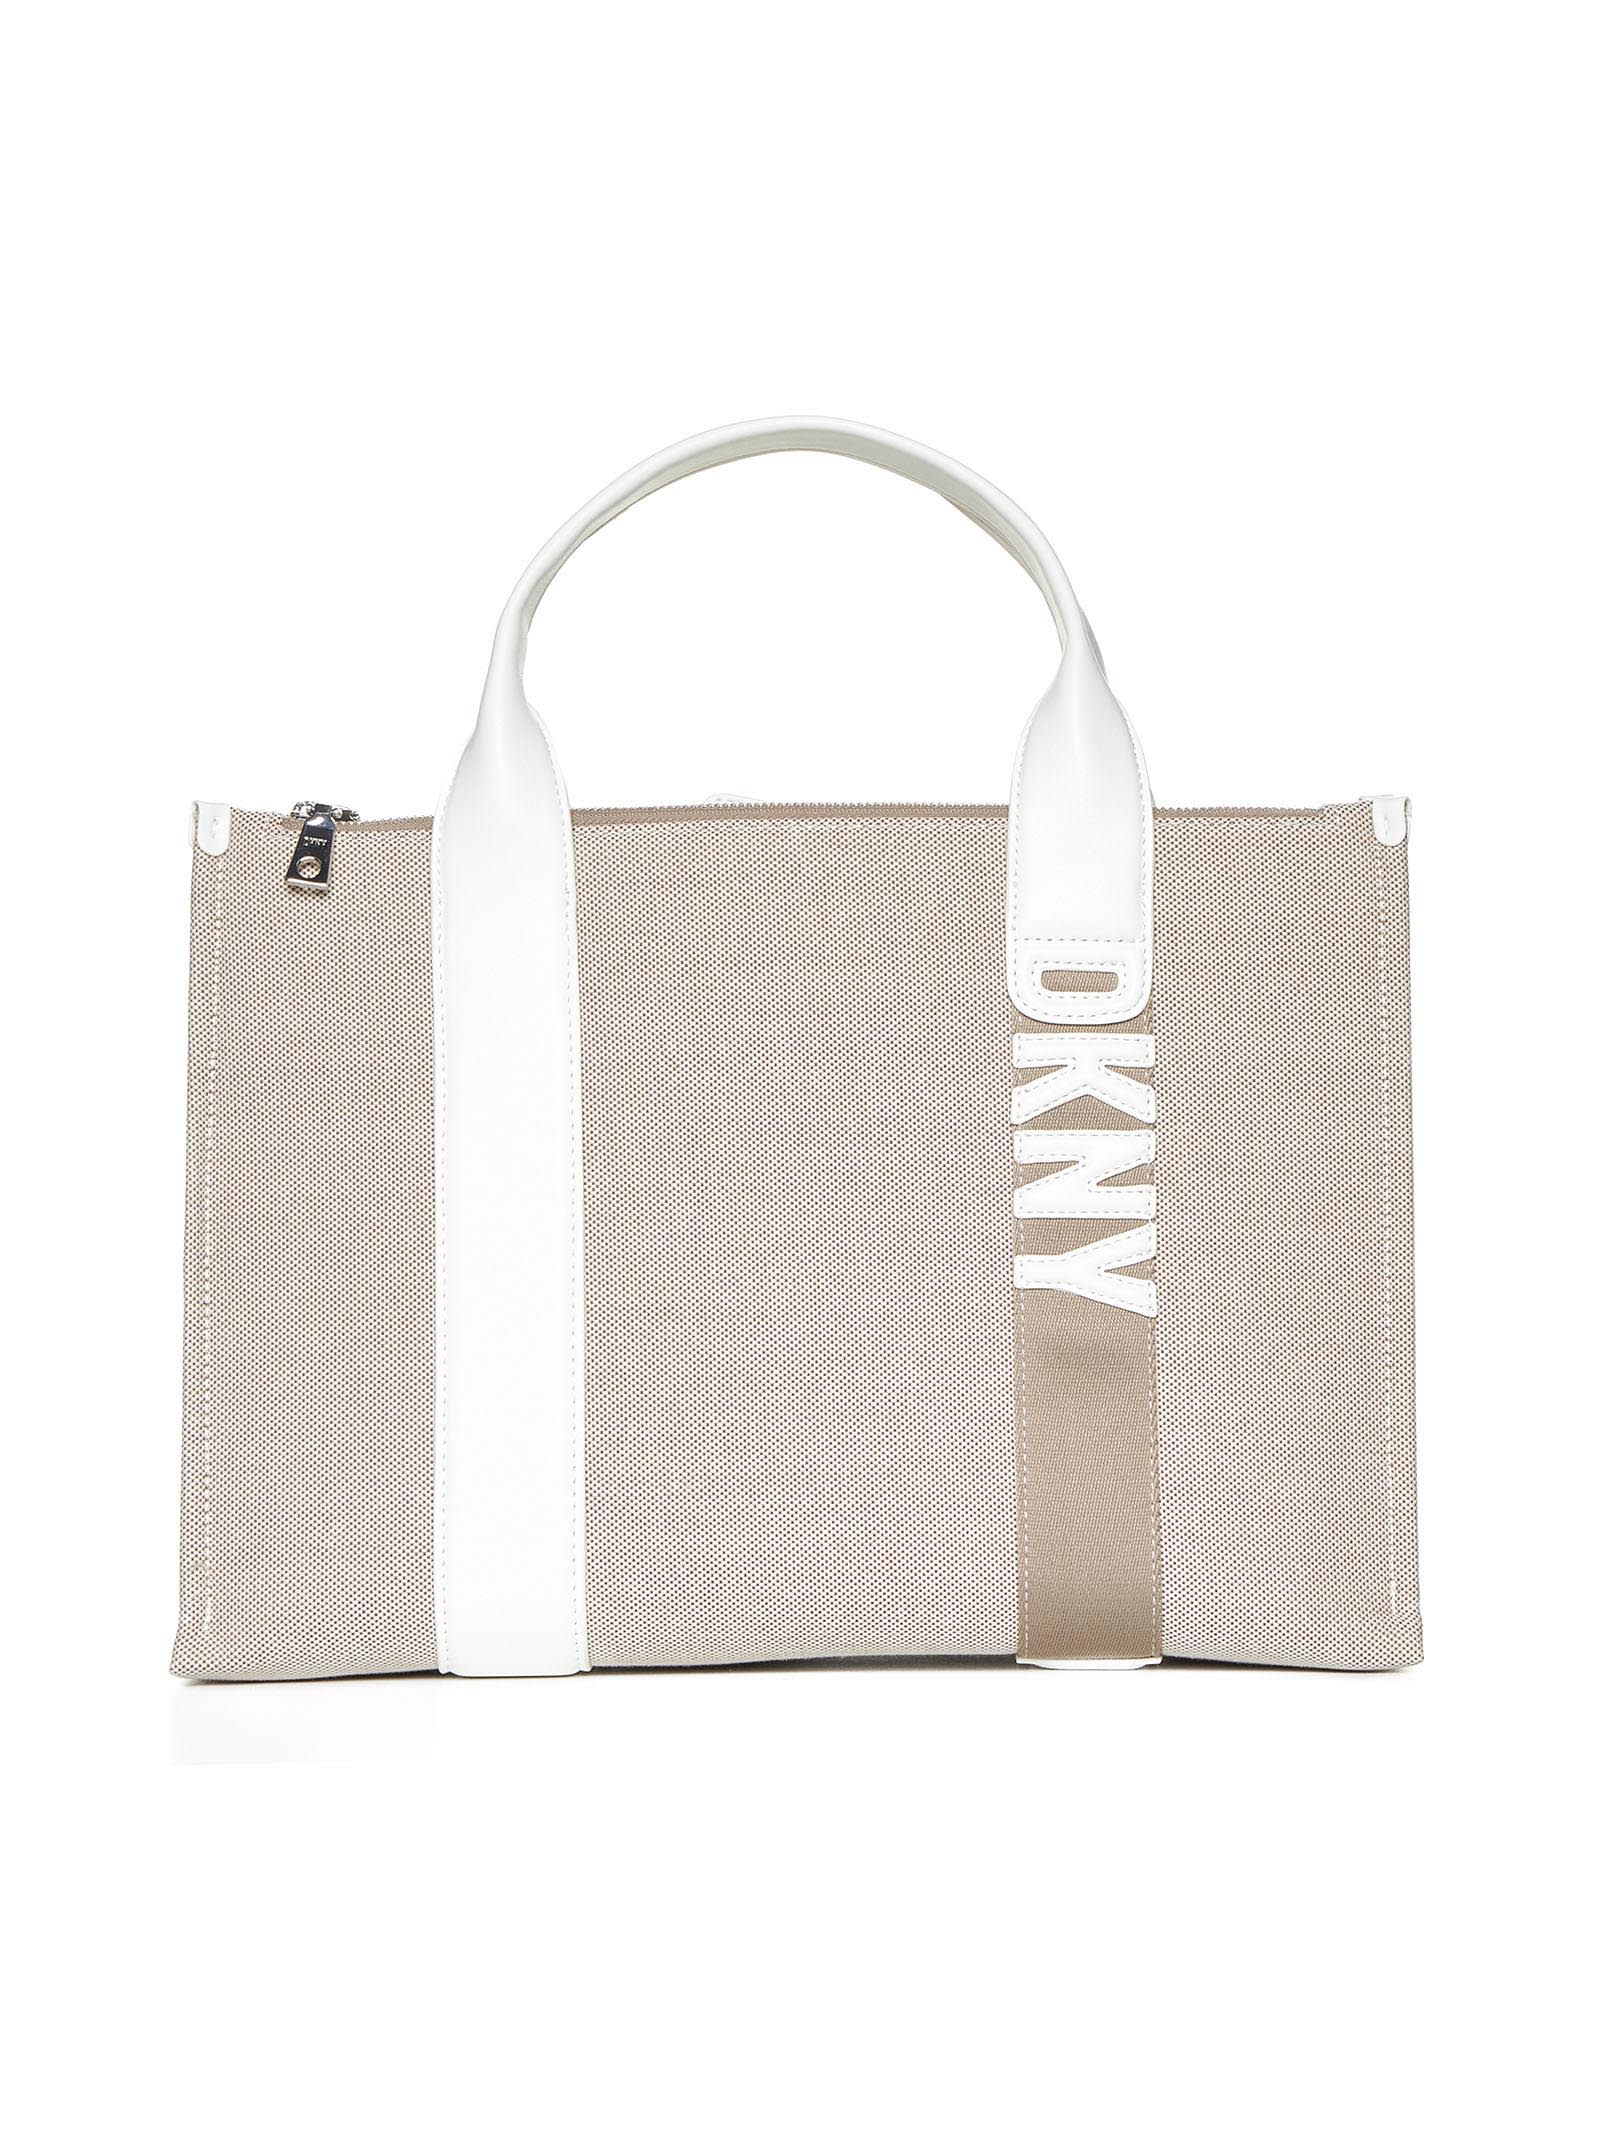 Shop Dkny Tote In Natural/white